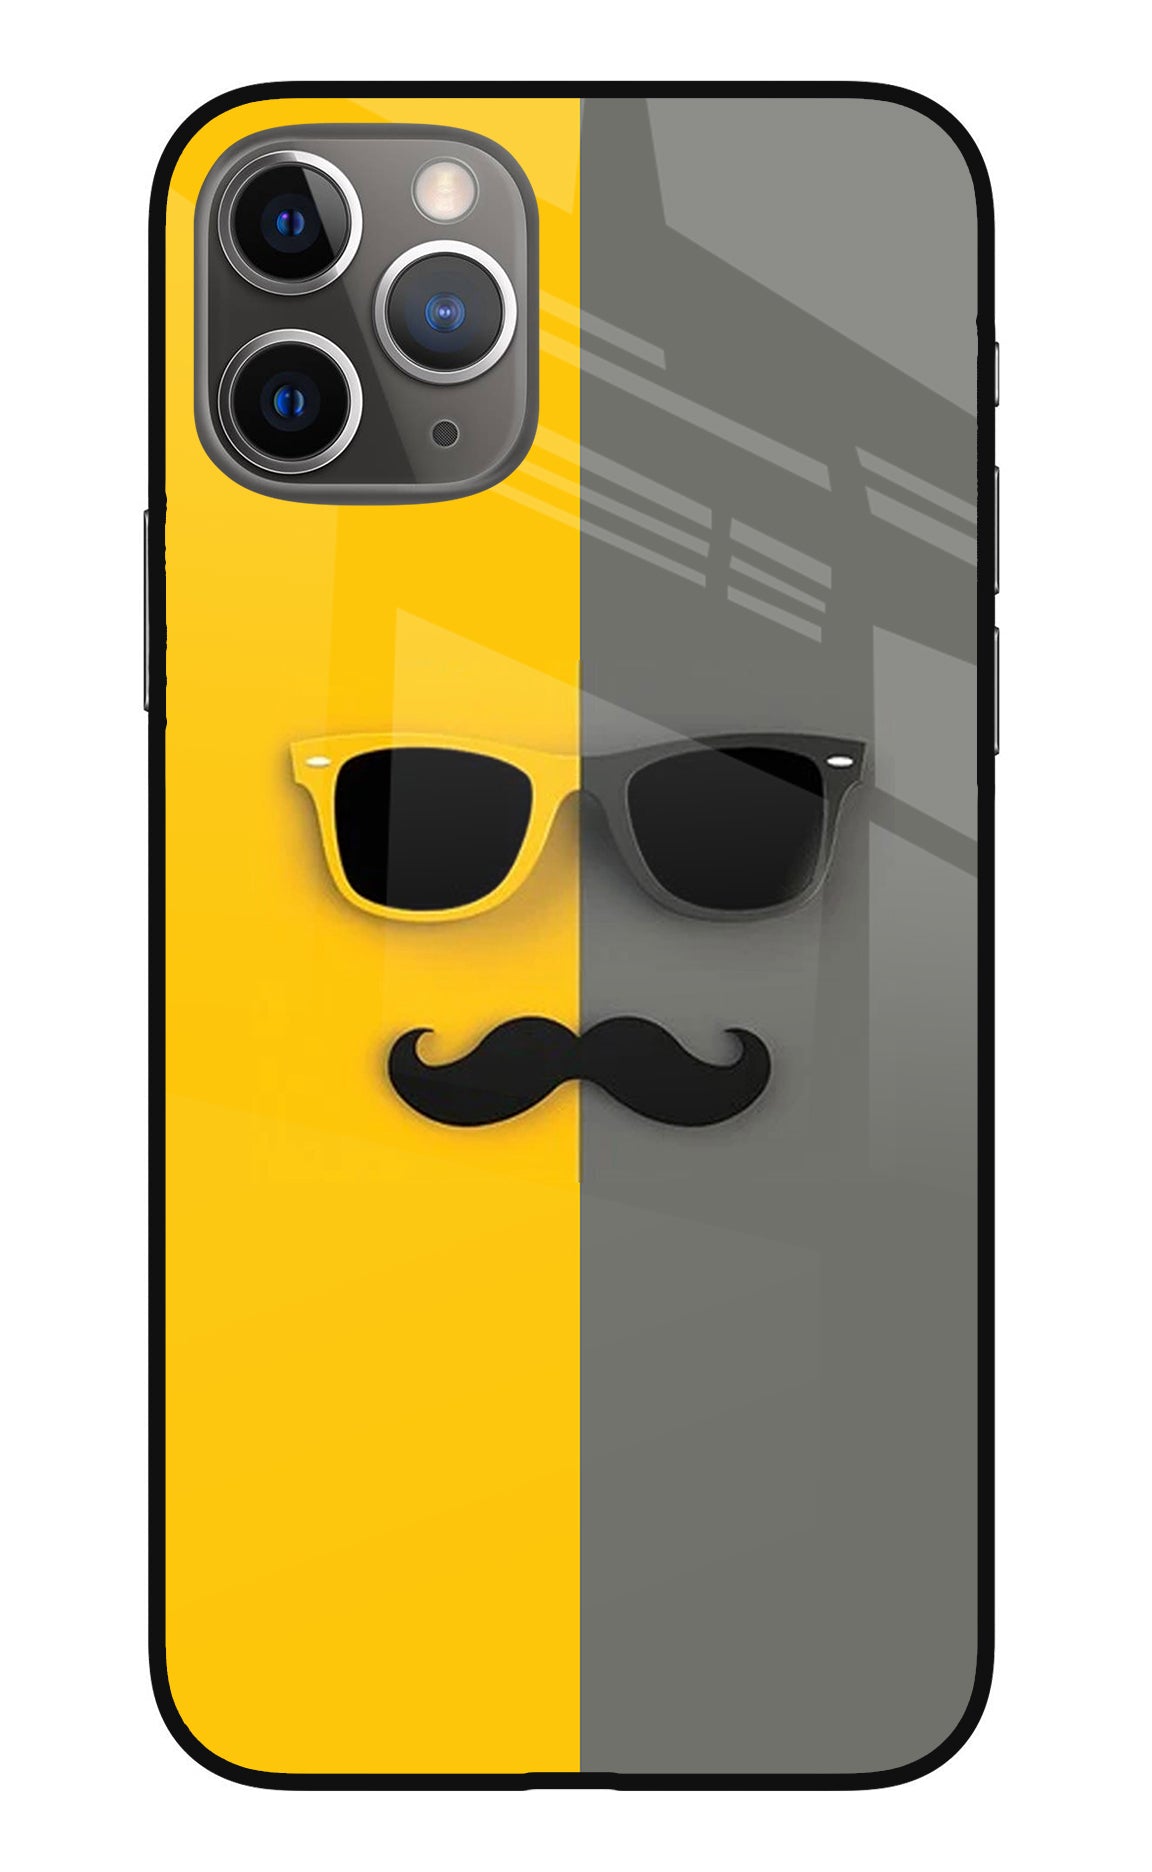 Sunglasses with Mustache iPhone 11 Pro Max Back Cover